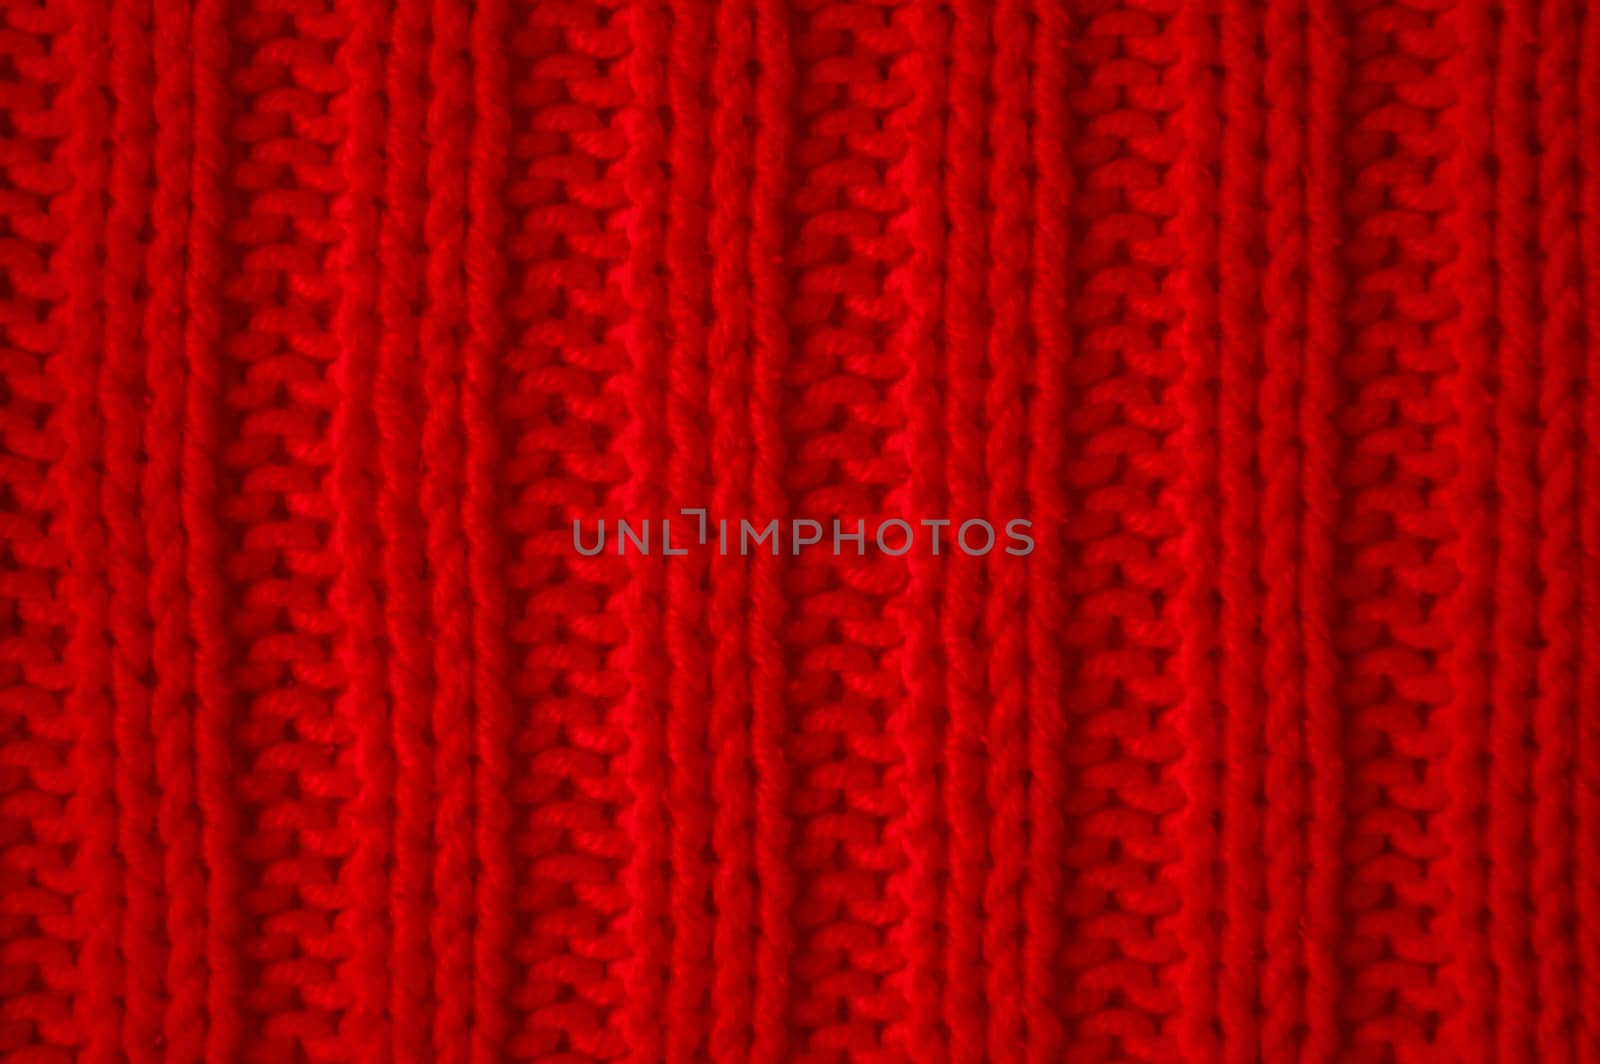 Detail Knitted Wool. Vintage Woven Pattern. Fiber Handmade Holiday Background. Soft Abstract Wool. Red Closeup Thread. Scandinavian Xmas Scarf. Cotton Print Cashmere. Knitted Fabric.